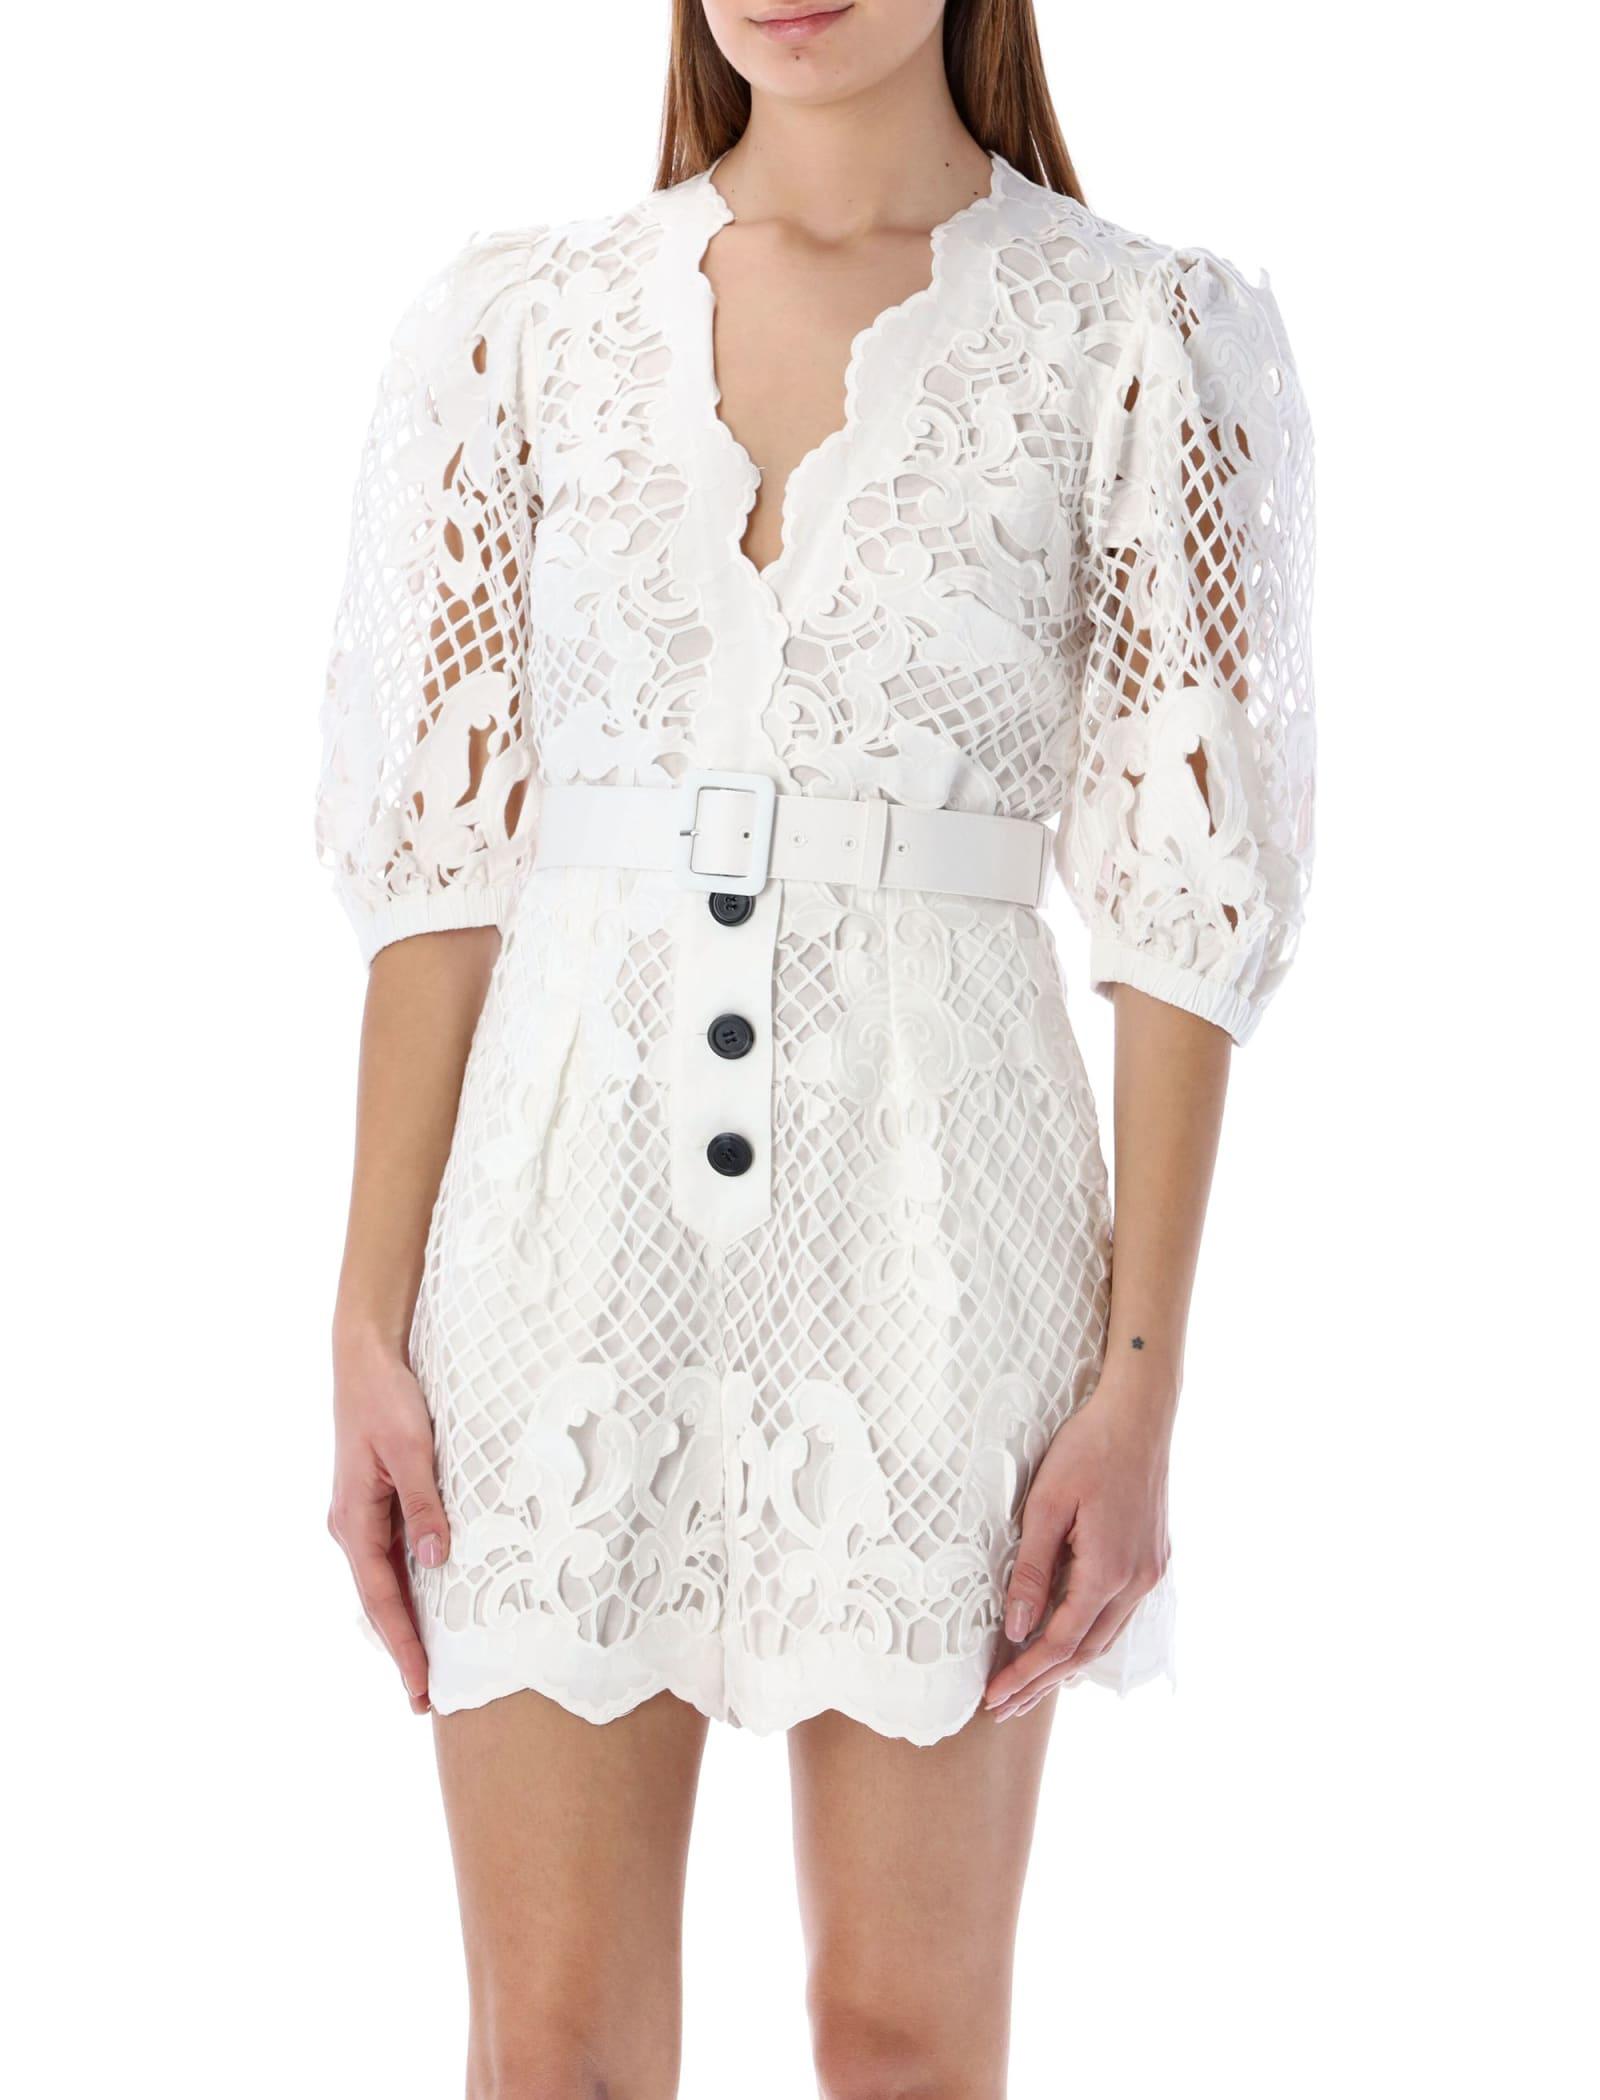 Self-Portrait Lattice Embroidered Cotton Playsuit in White | Lyst